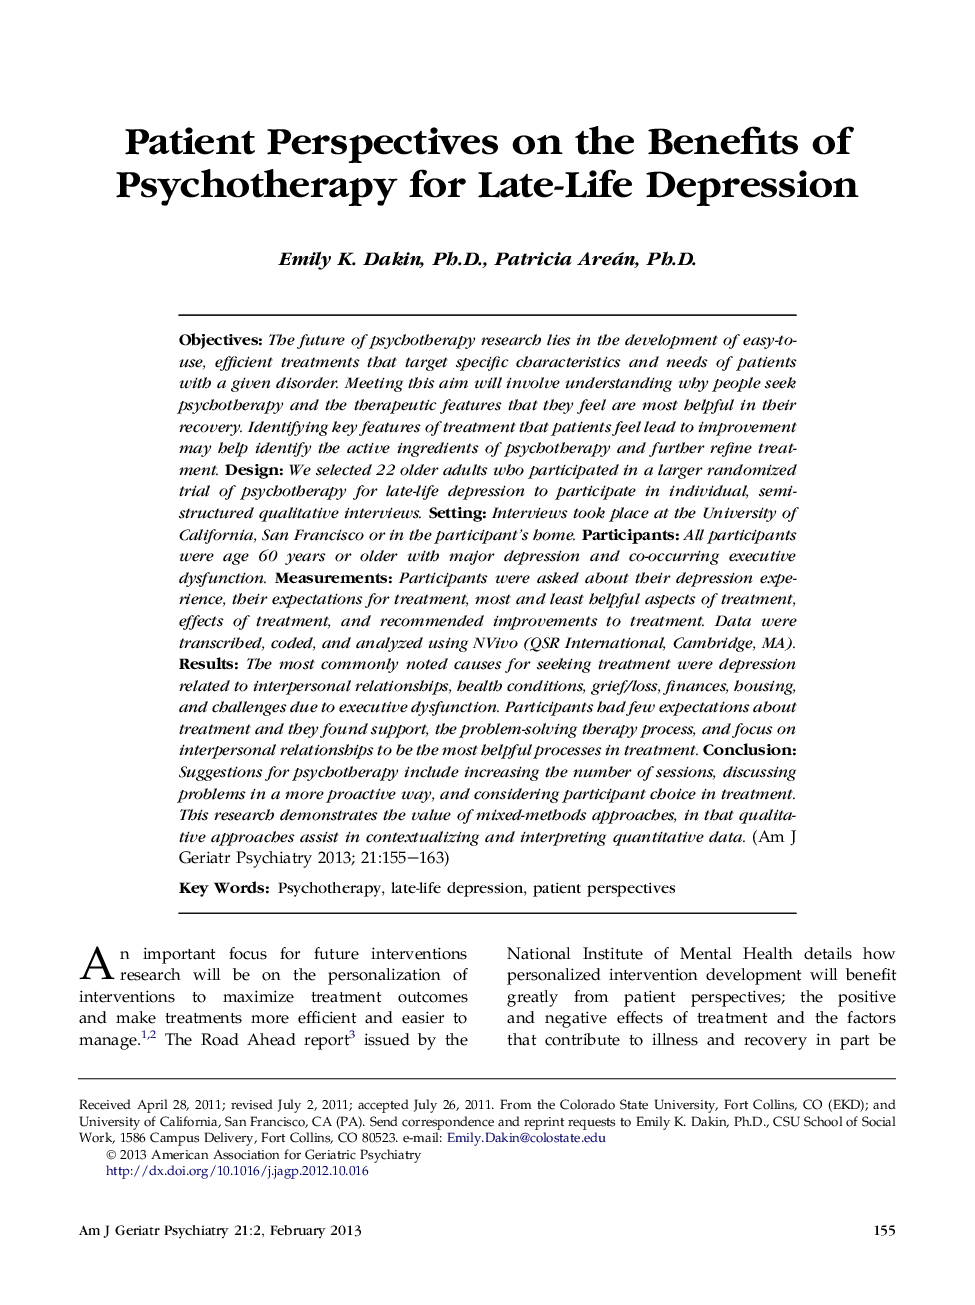 Patient Perspectives on the Benefits of Psychotherapy for Late-Life Depression